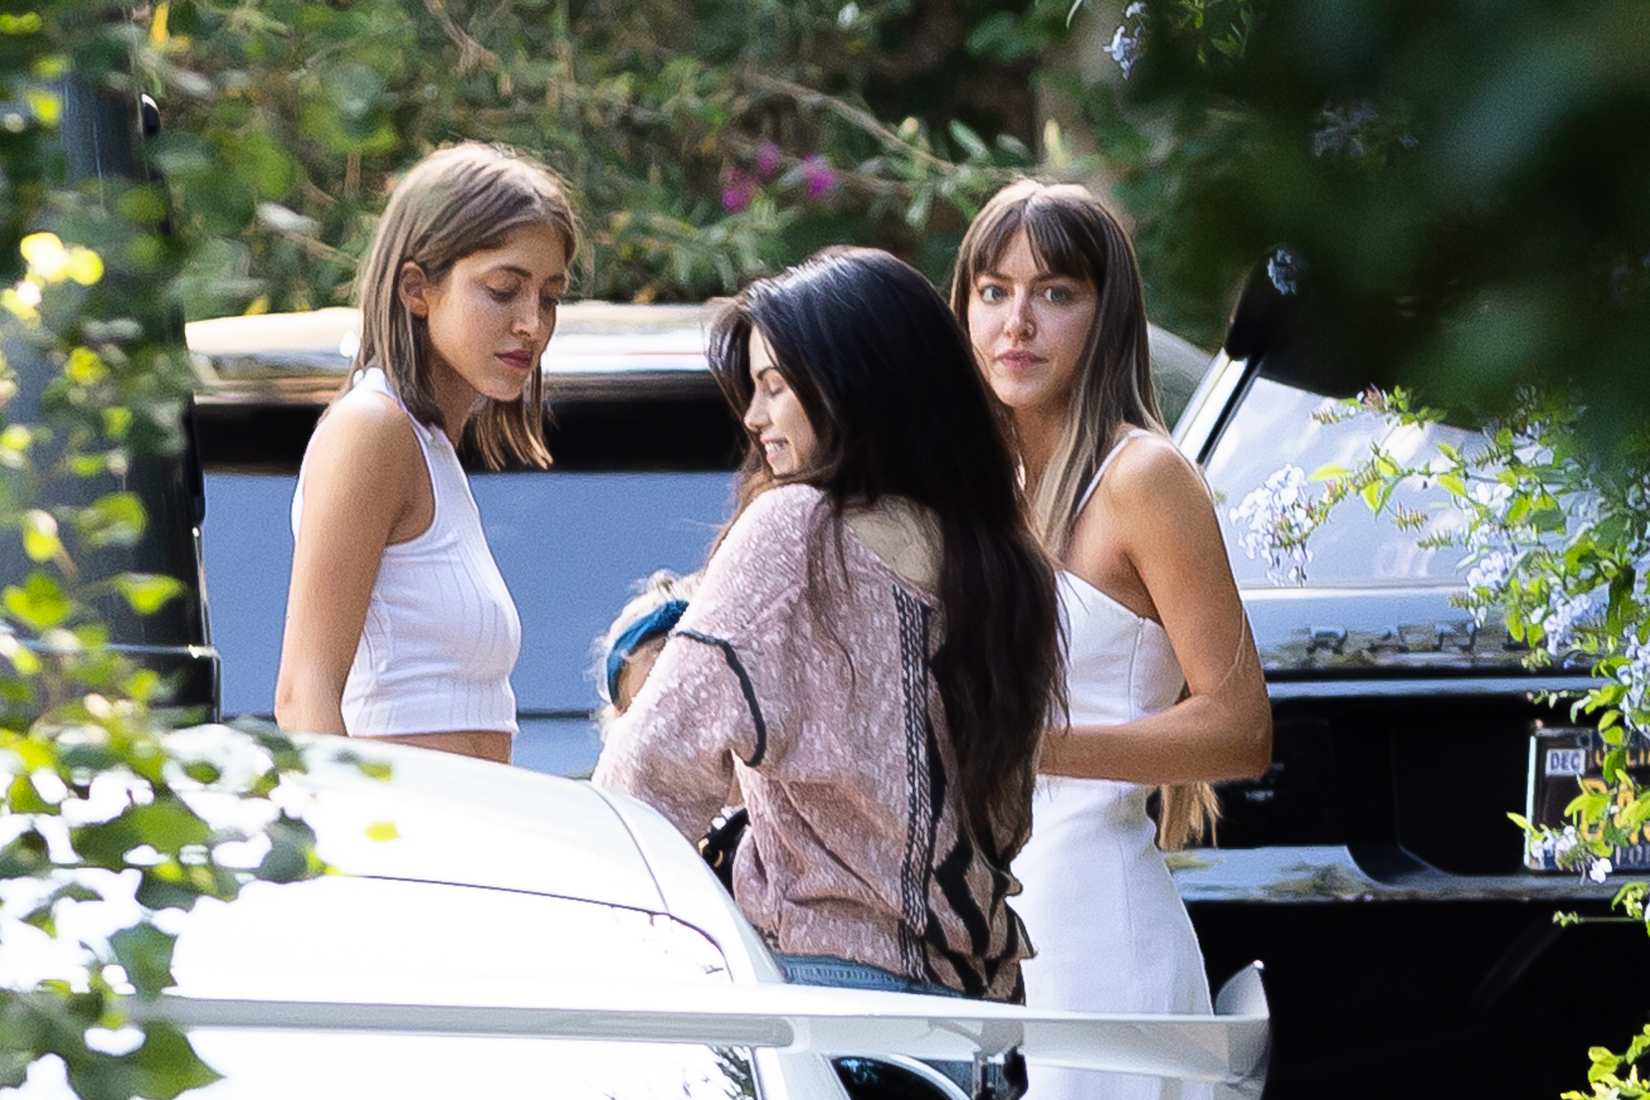 Selena_Gomez_-_steps_out_to_meet_some_friends_in_Los_Angeles2C_California_06252020-02.jpg